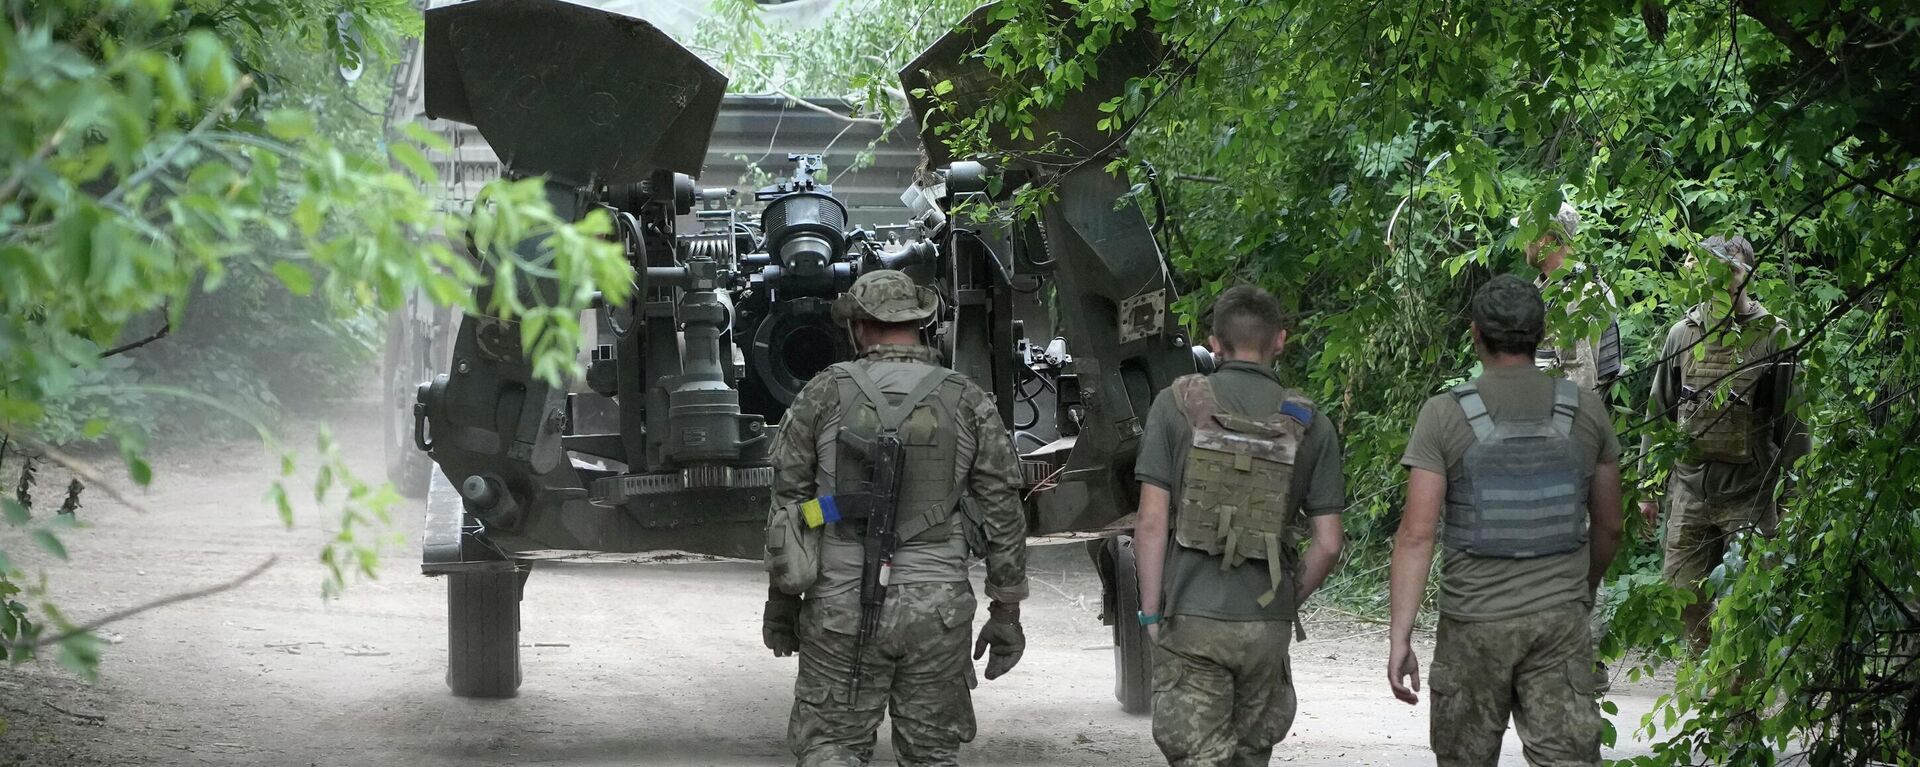 Ukrainian soldiers move a U.S.-supplied M777 howitzer into position to fire at Russian positions in Ukraine's eastern Donbas region Saturday, June 18, 2022 - Sputnik International, 1920, 23.07.2023